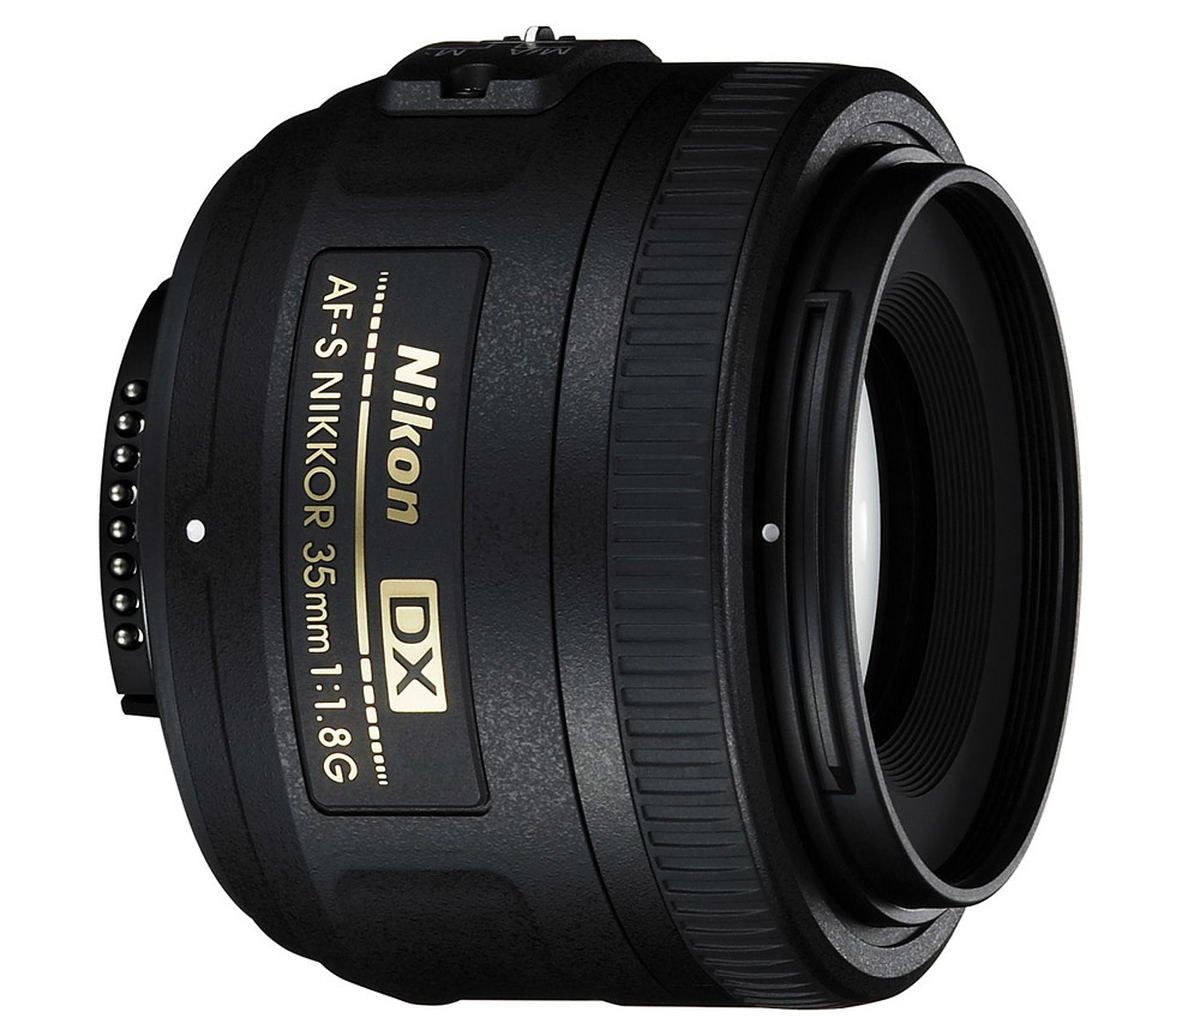 Nikon AF-S DX 35mm f/1.8 G : Specifications and Opinions | JuzaPhoto